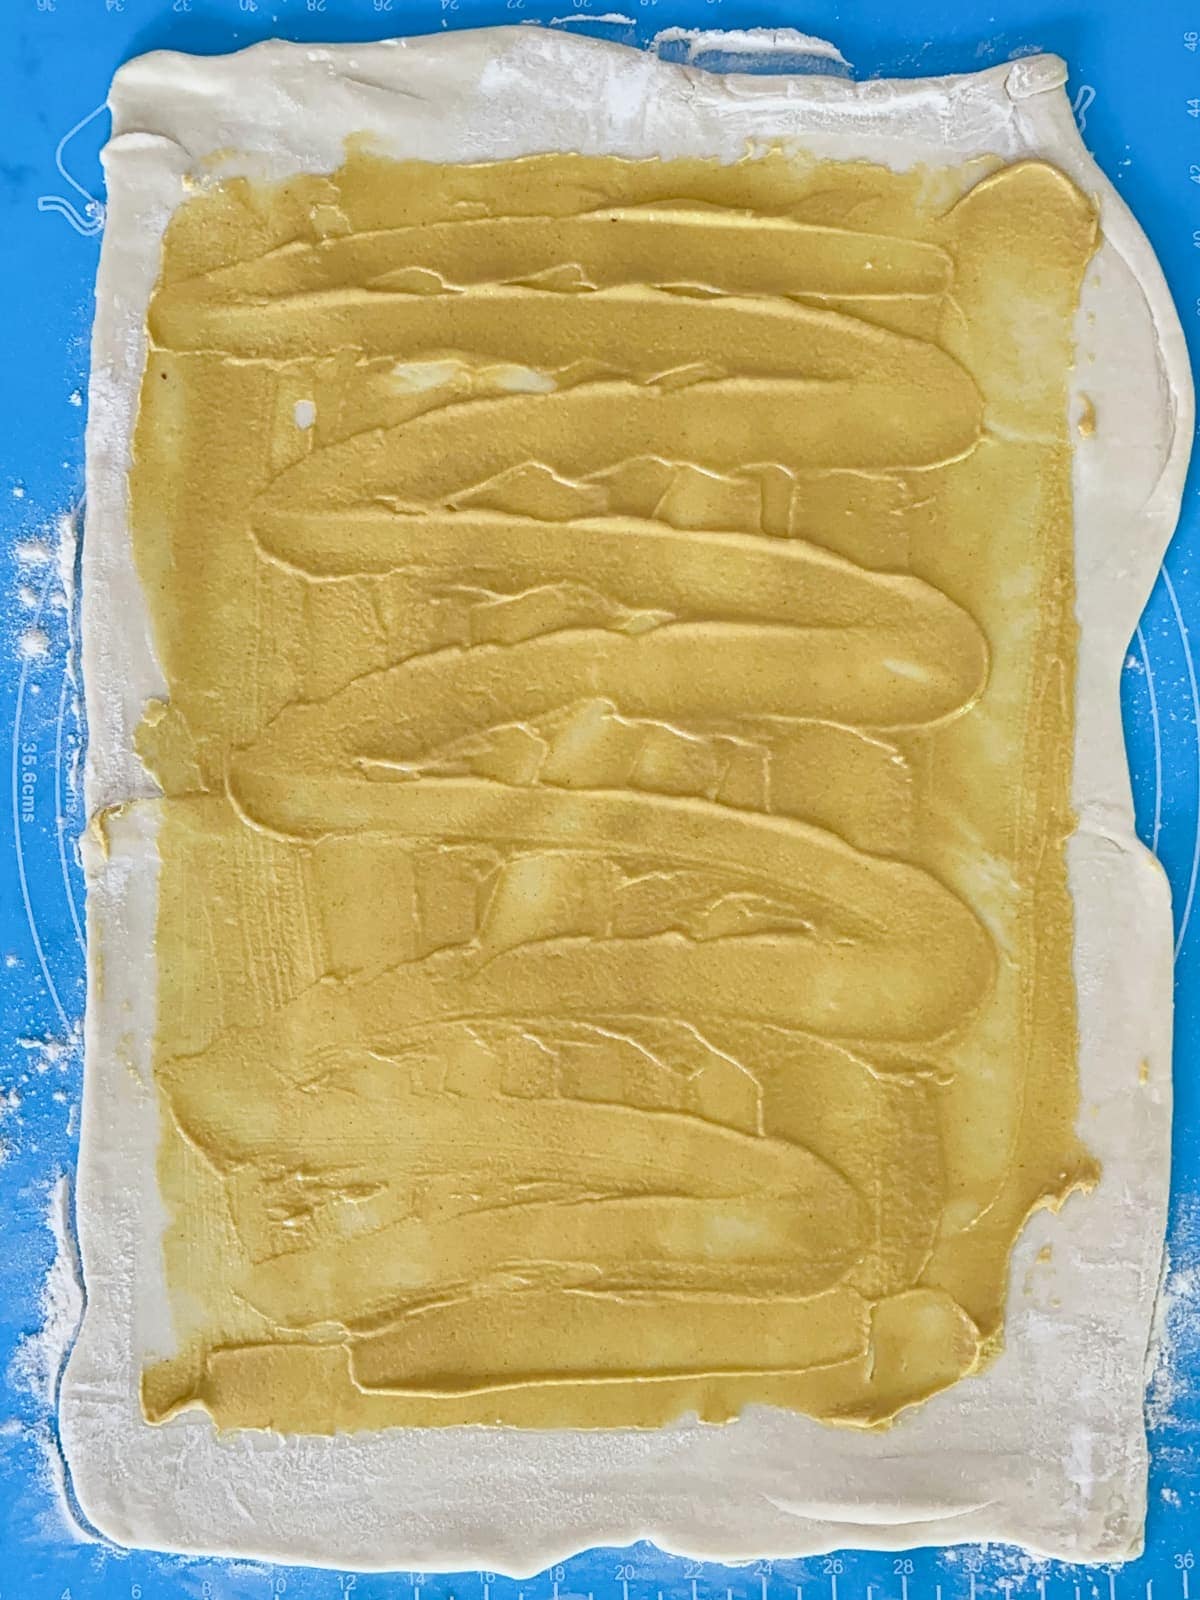 dijon mustard spread with a spatula on puff pastry dough